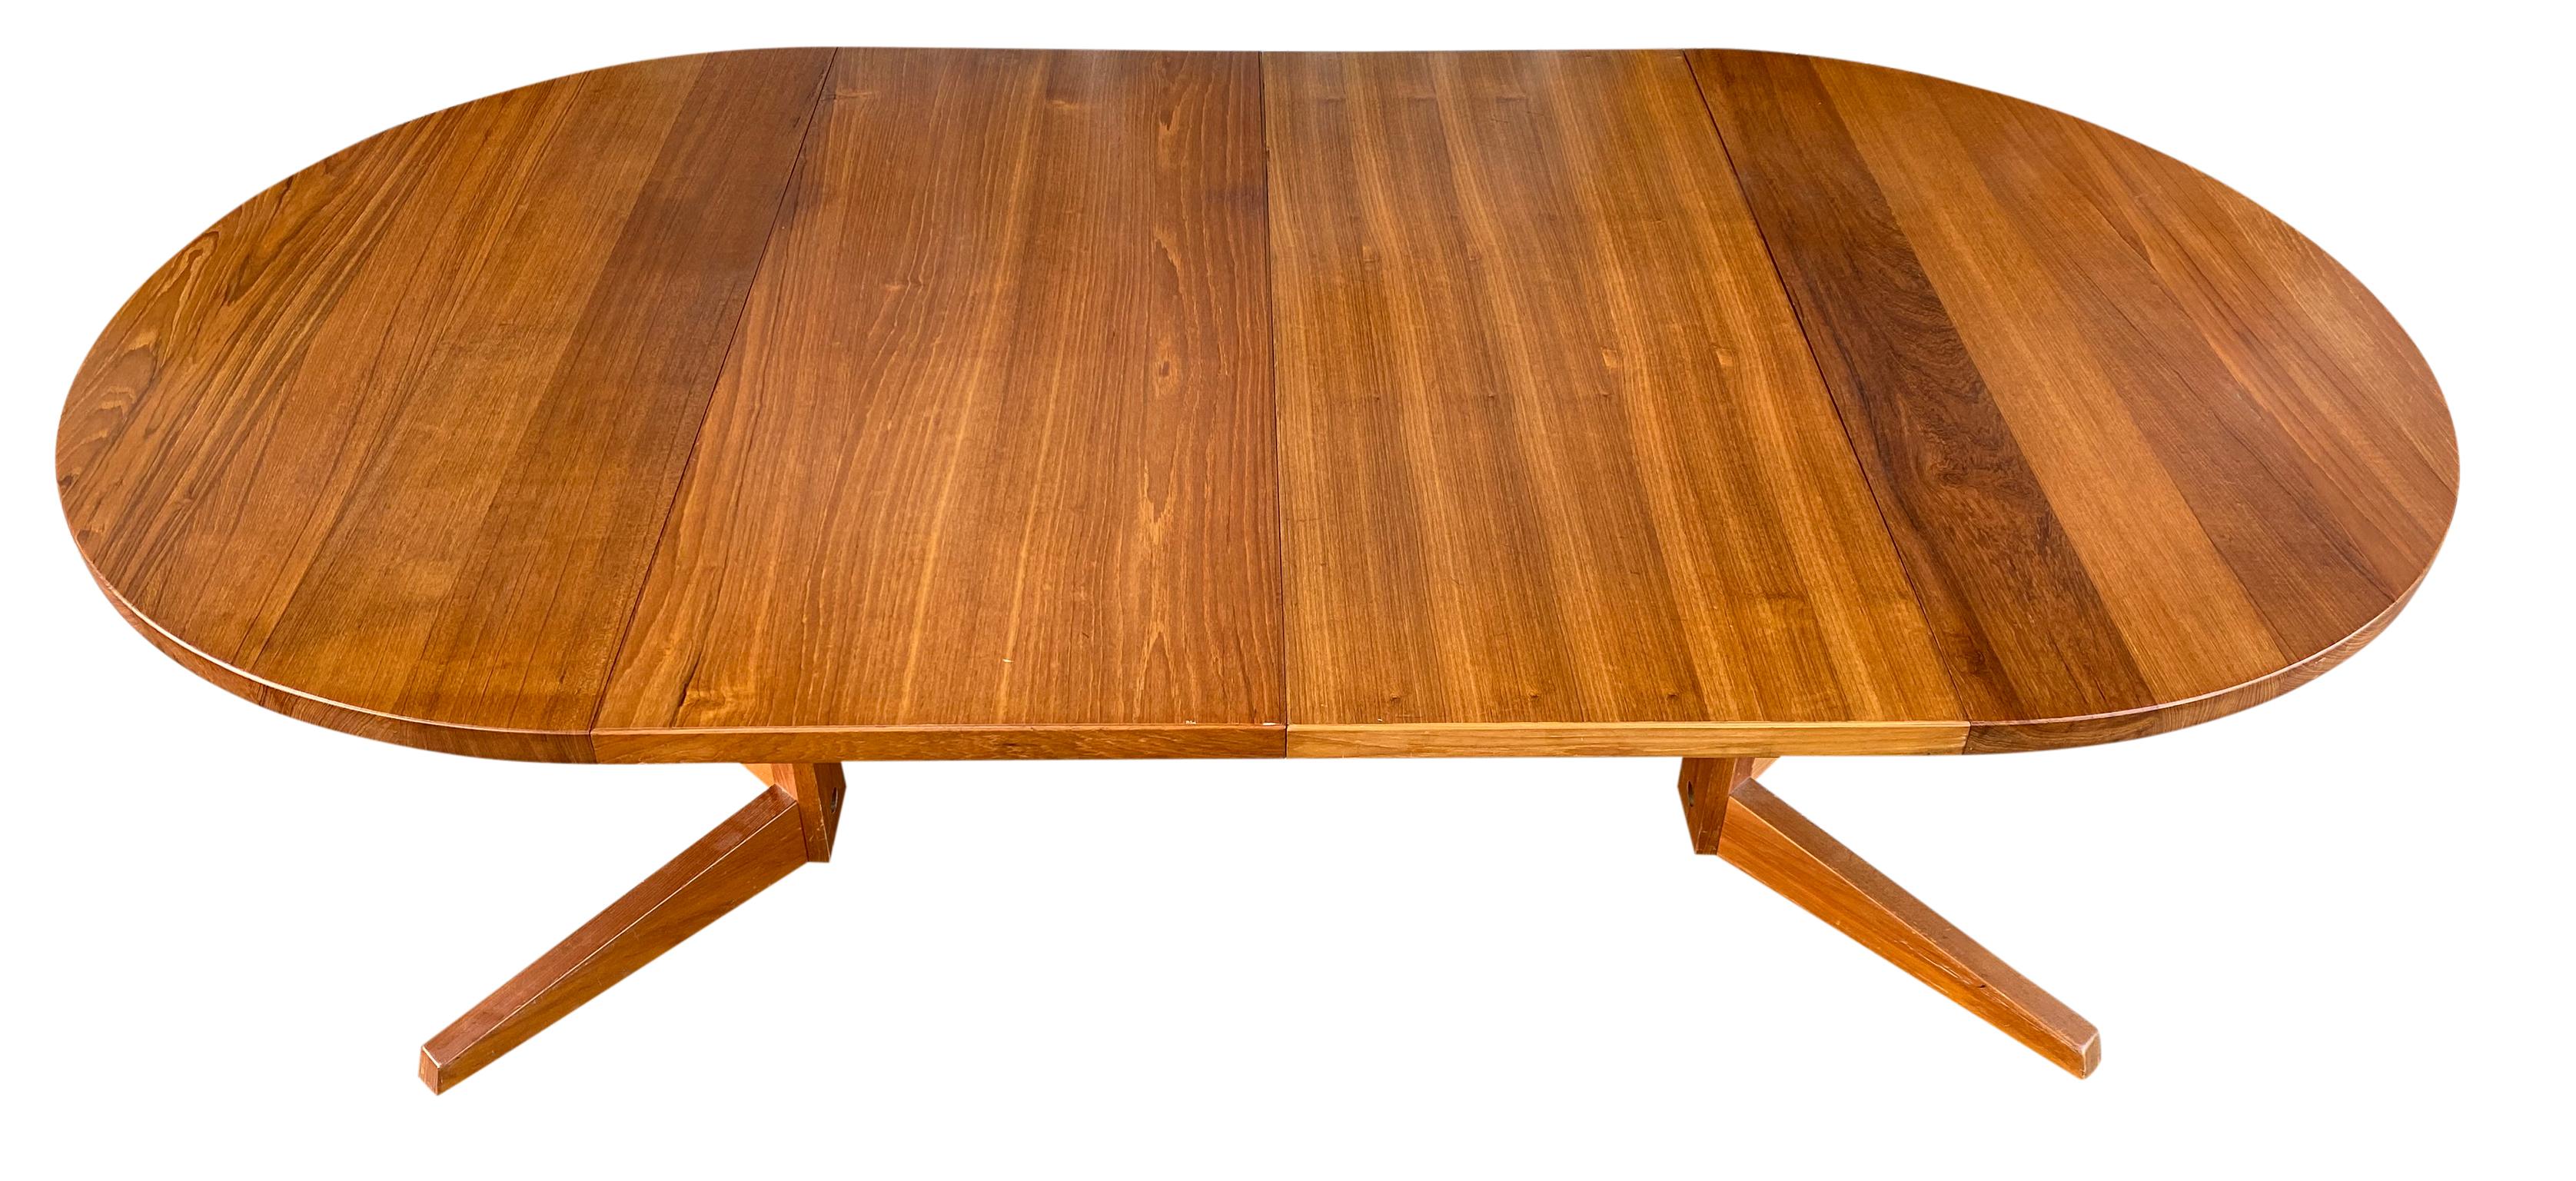 Mid-20th Century Midcentury Round Solid Teak Danish Extension Dining Table by CJ Rosengaarden